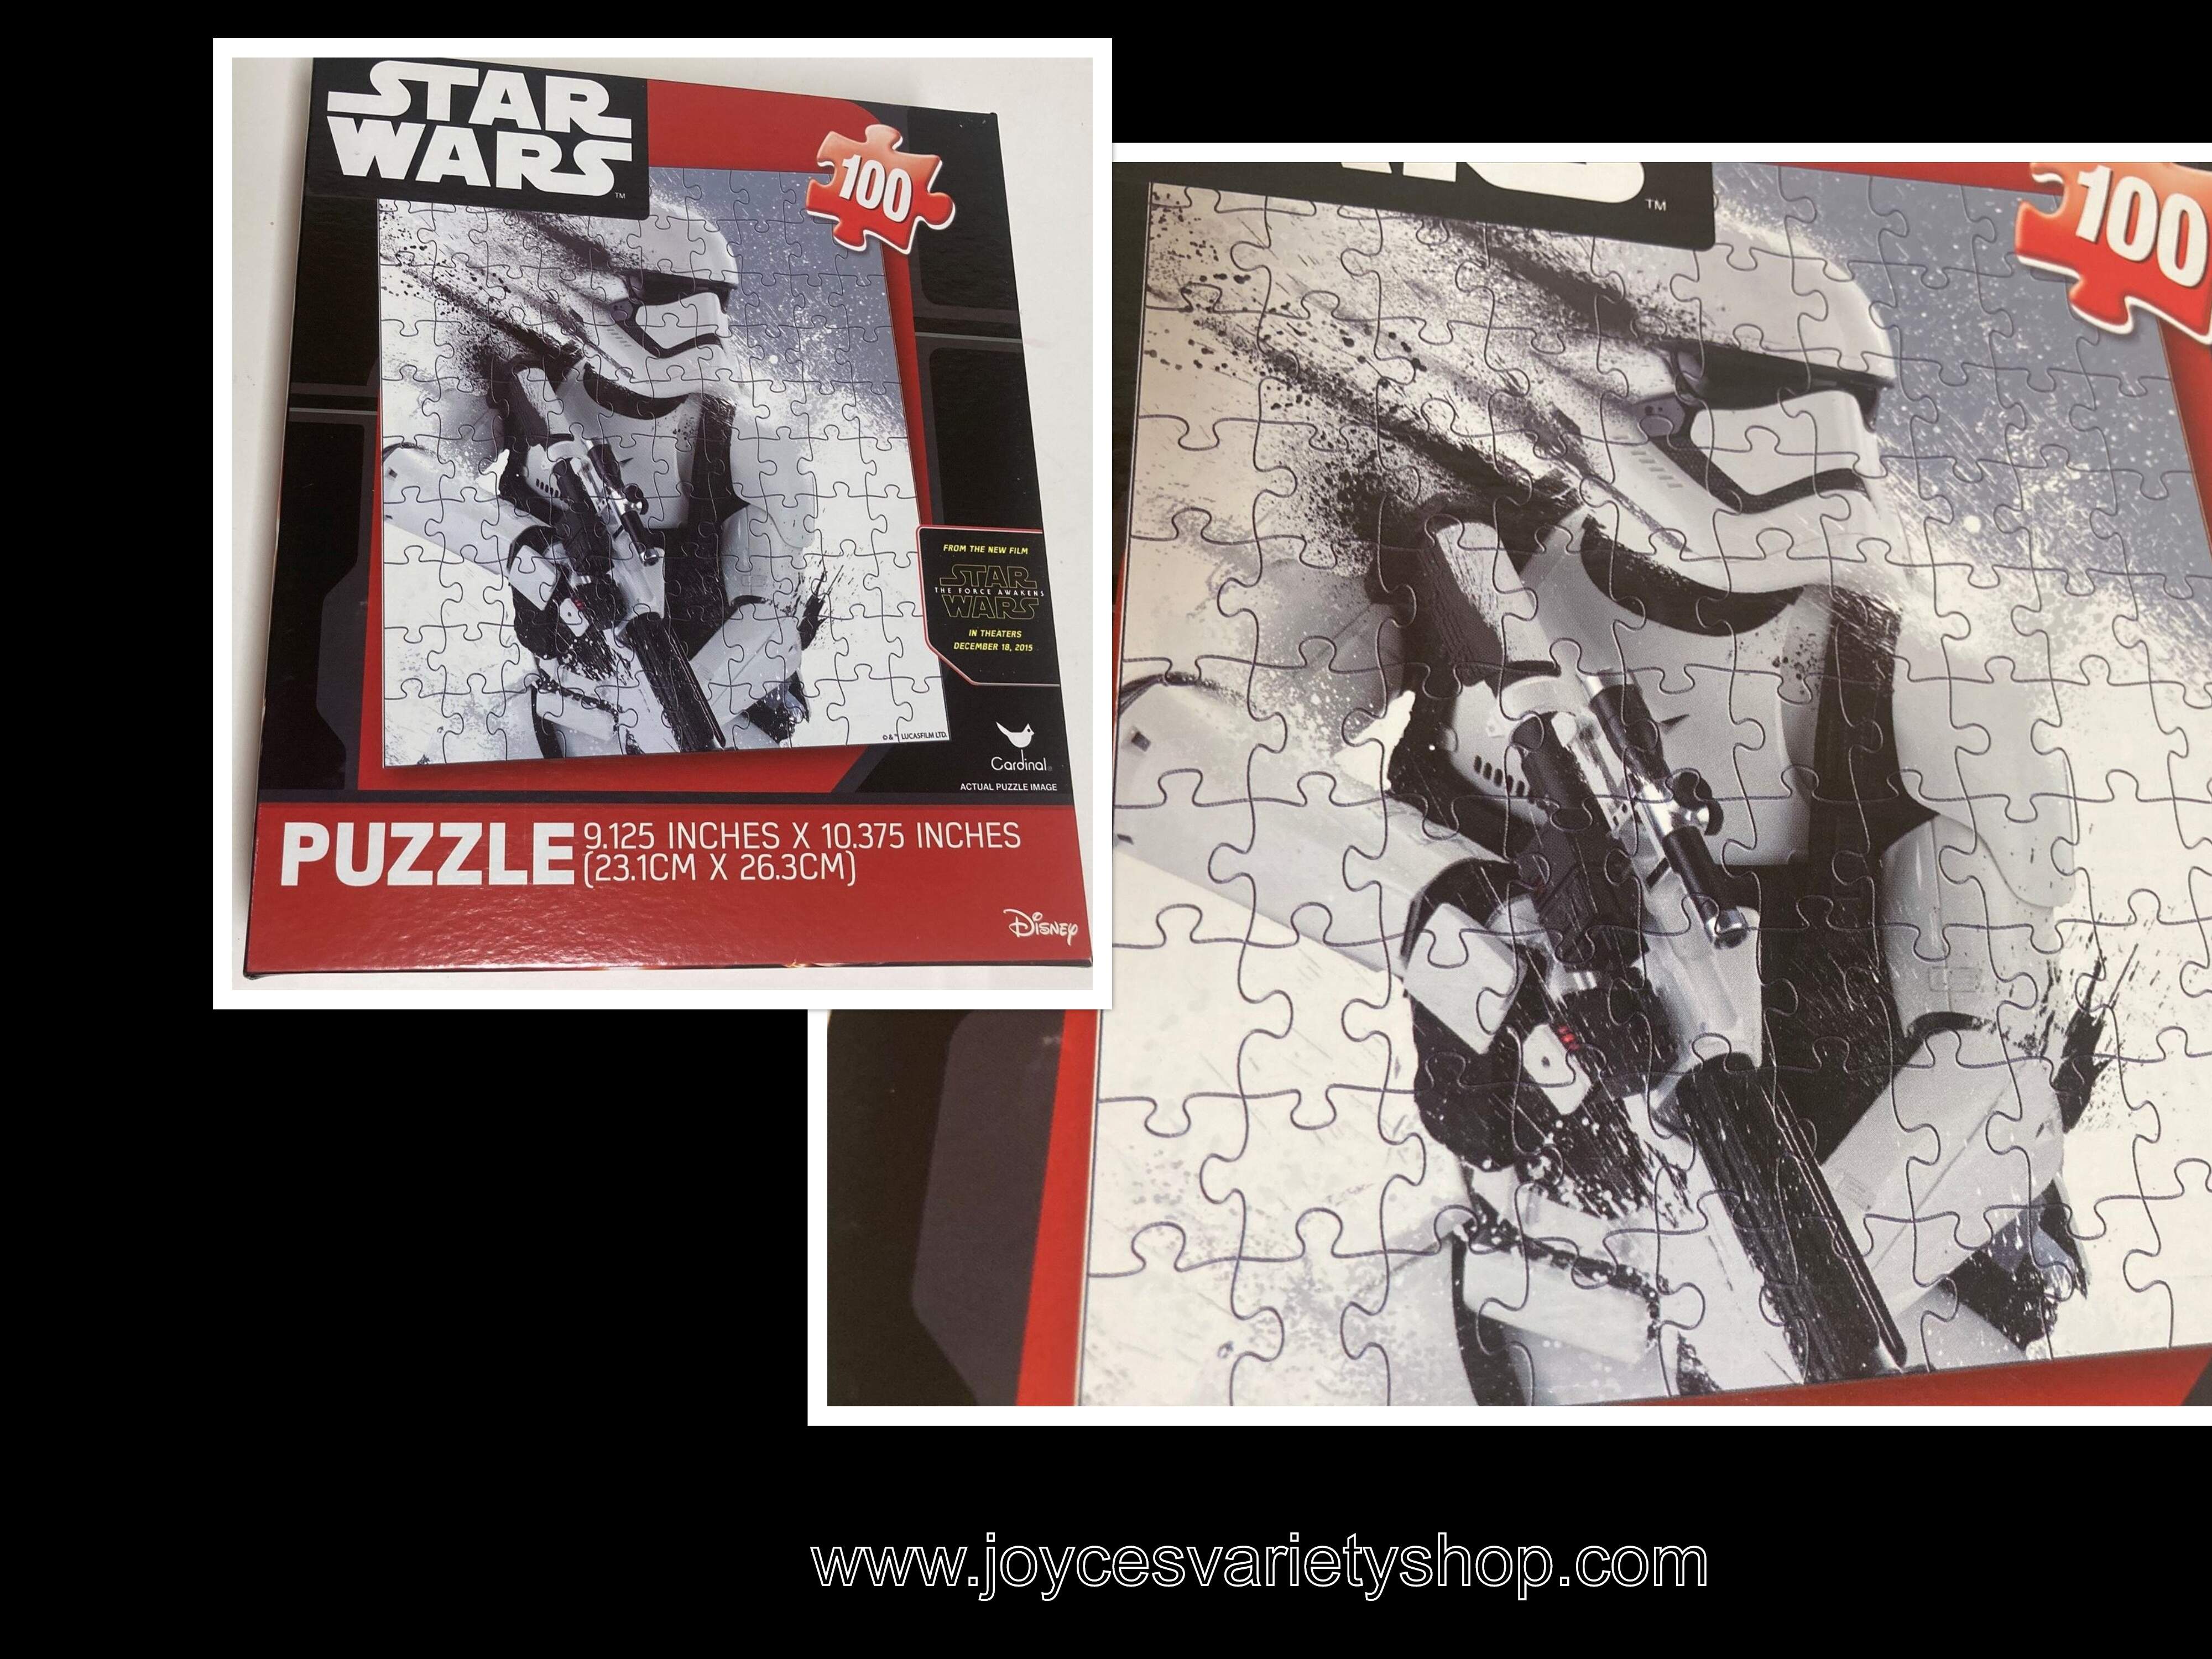 Star Wars Storm Troopers Puzzle 100 Piece 9" x 10" The Force Awakens 2015